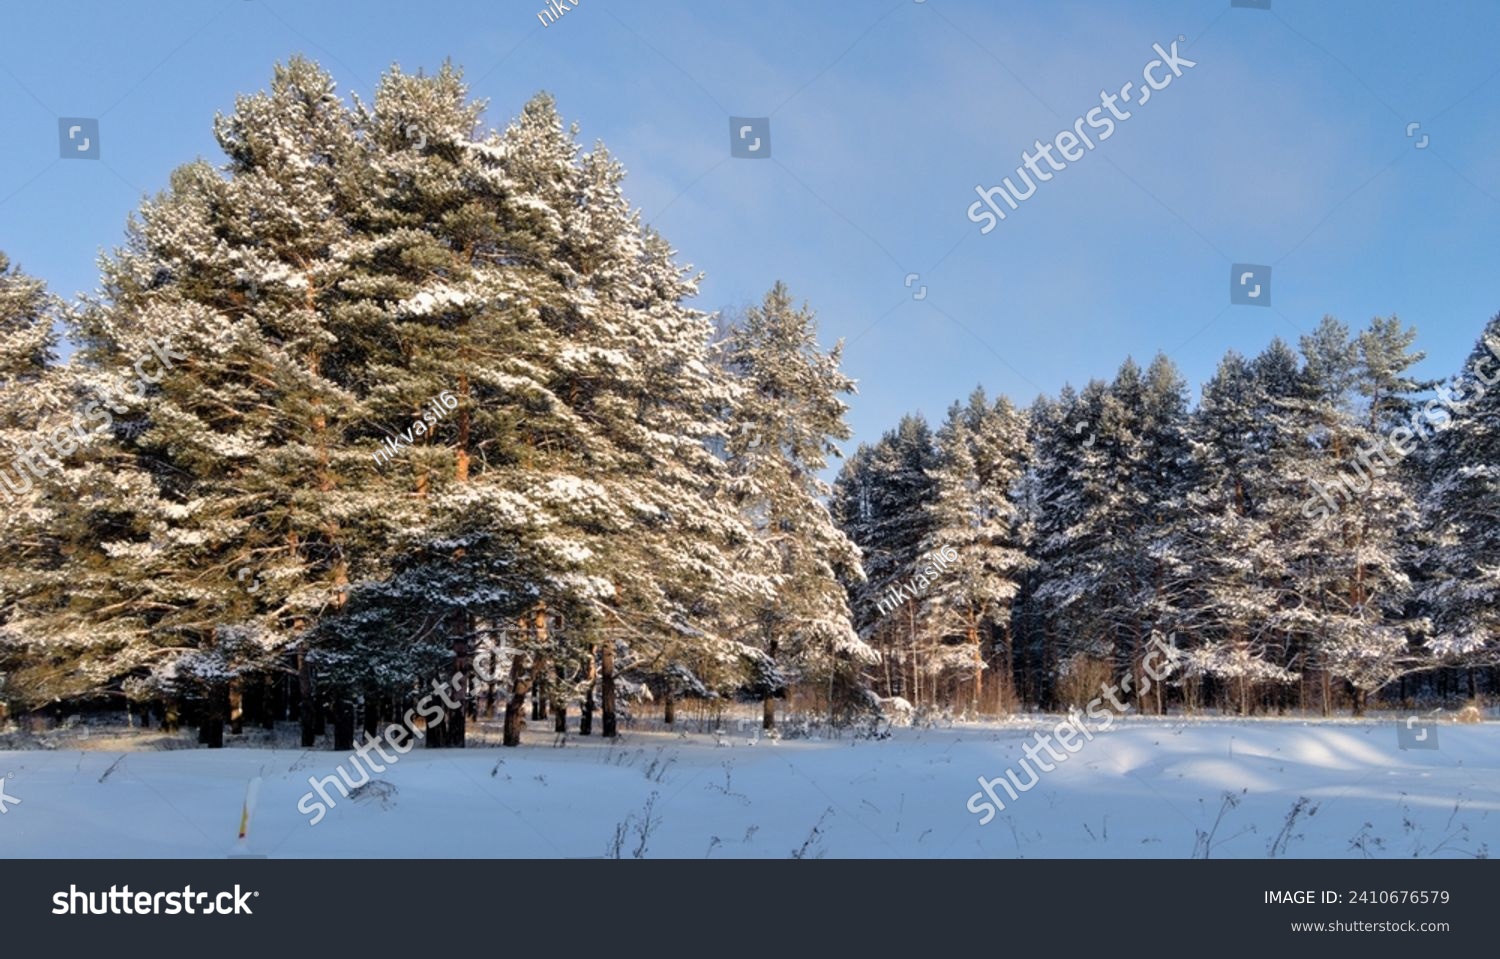 Forest winter landscape with snow-covered pine trees #2410676579